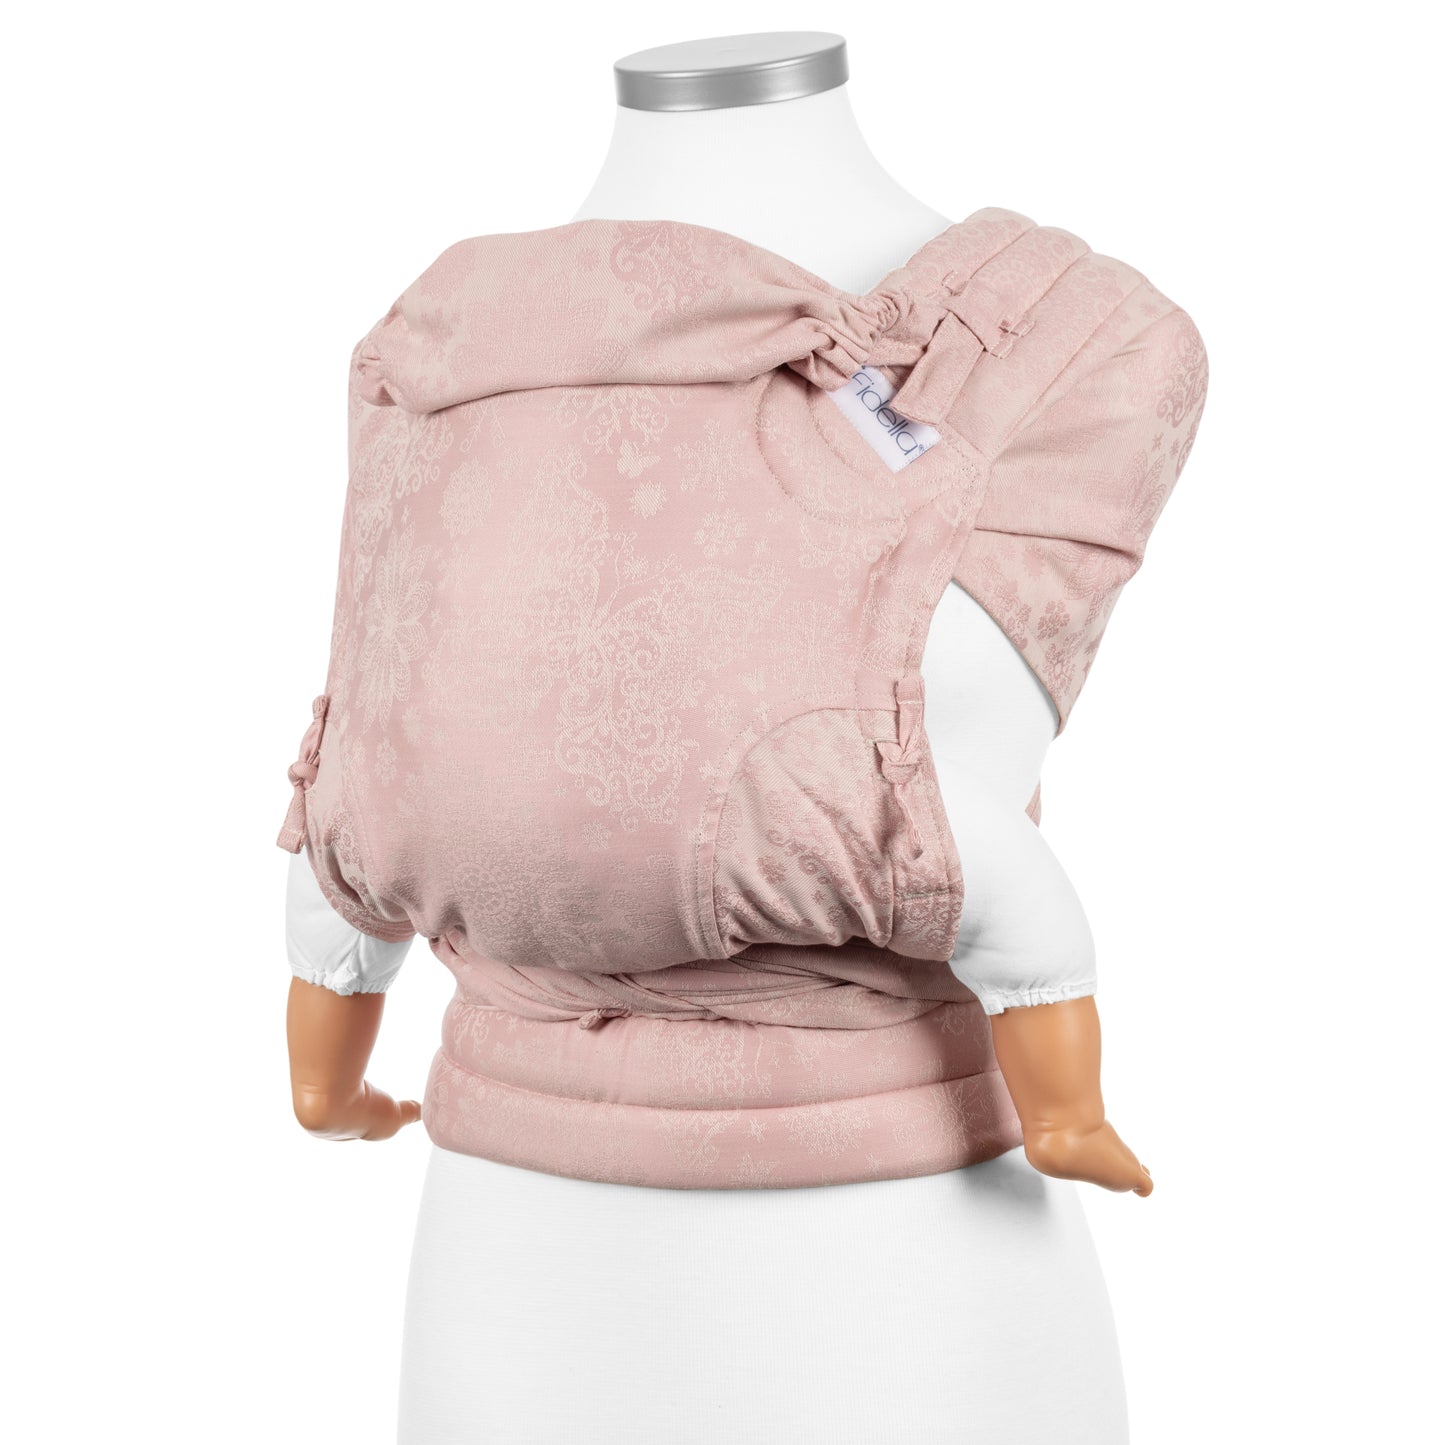 Fly Tai - Mei Tai Baby Carrier - Iced Butterfly - pale pink